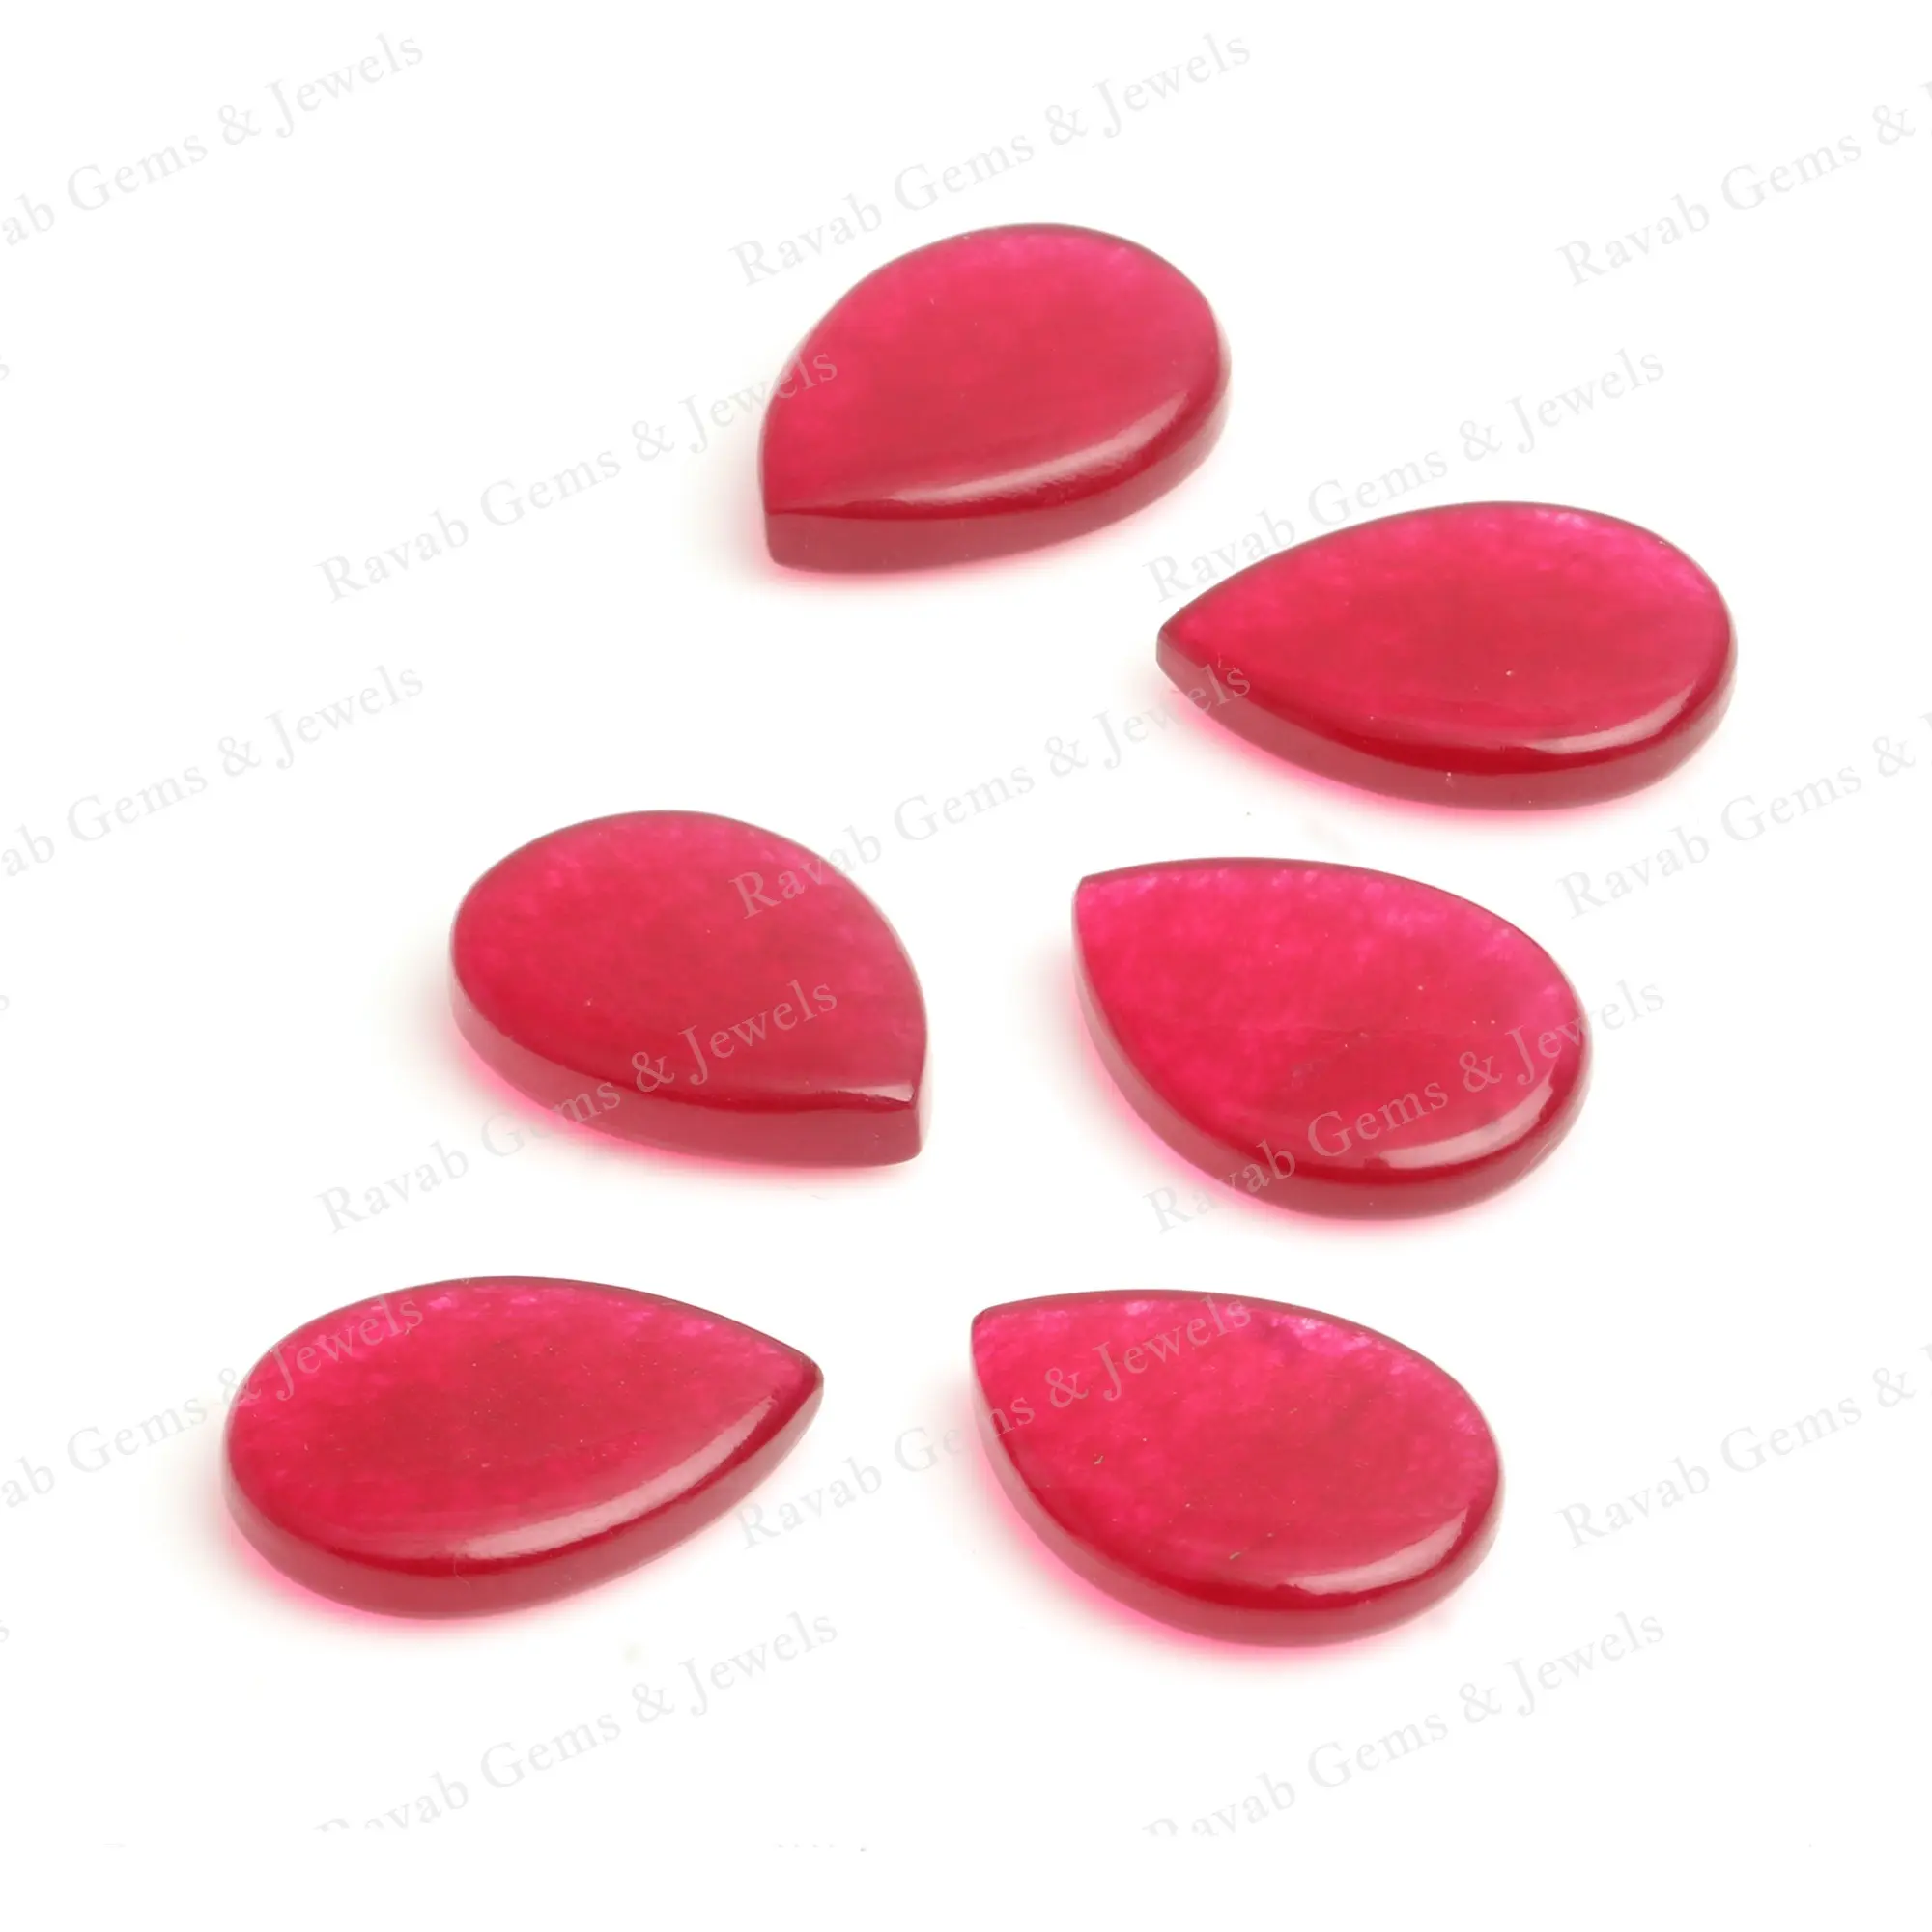 10x14mm Beautiful Hot Pink Jade Quartz Smooth Pear Shape Briolette Calibrated Loose Gemstone For Pendant Earrings Jewelry Making